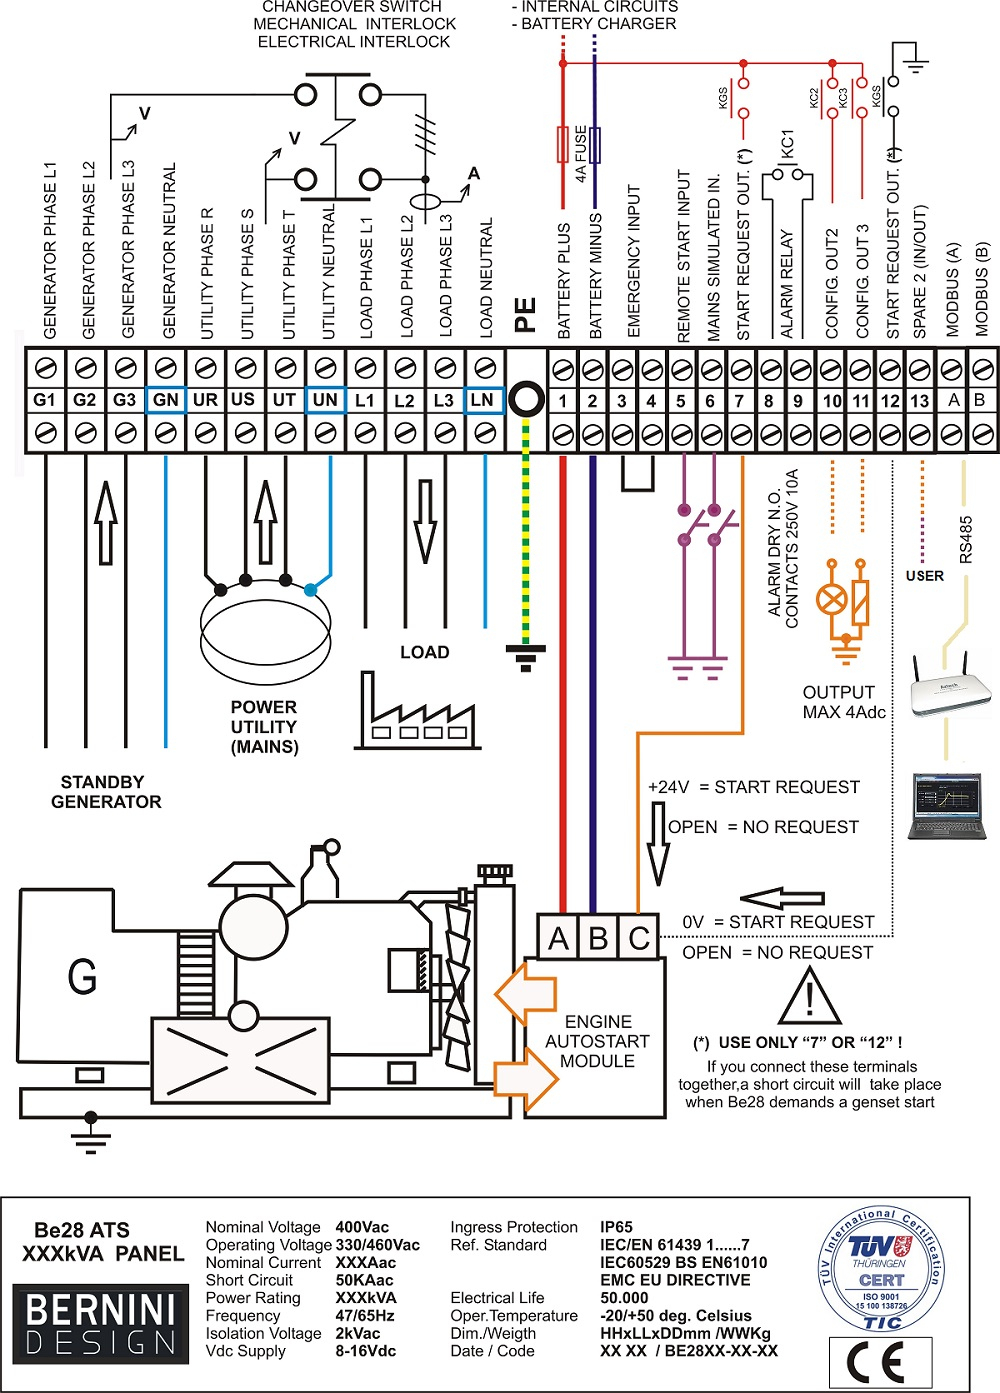 Wiring Diagram For Auto Transfer Switch - Wiring Diagrams Lose - Transfer Switch Wiring Diagram